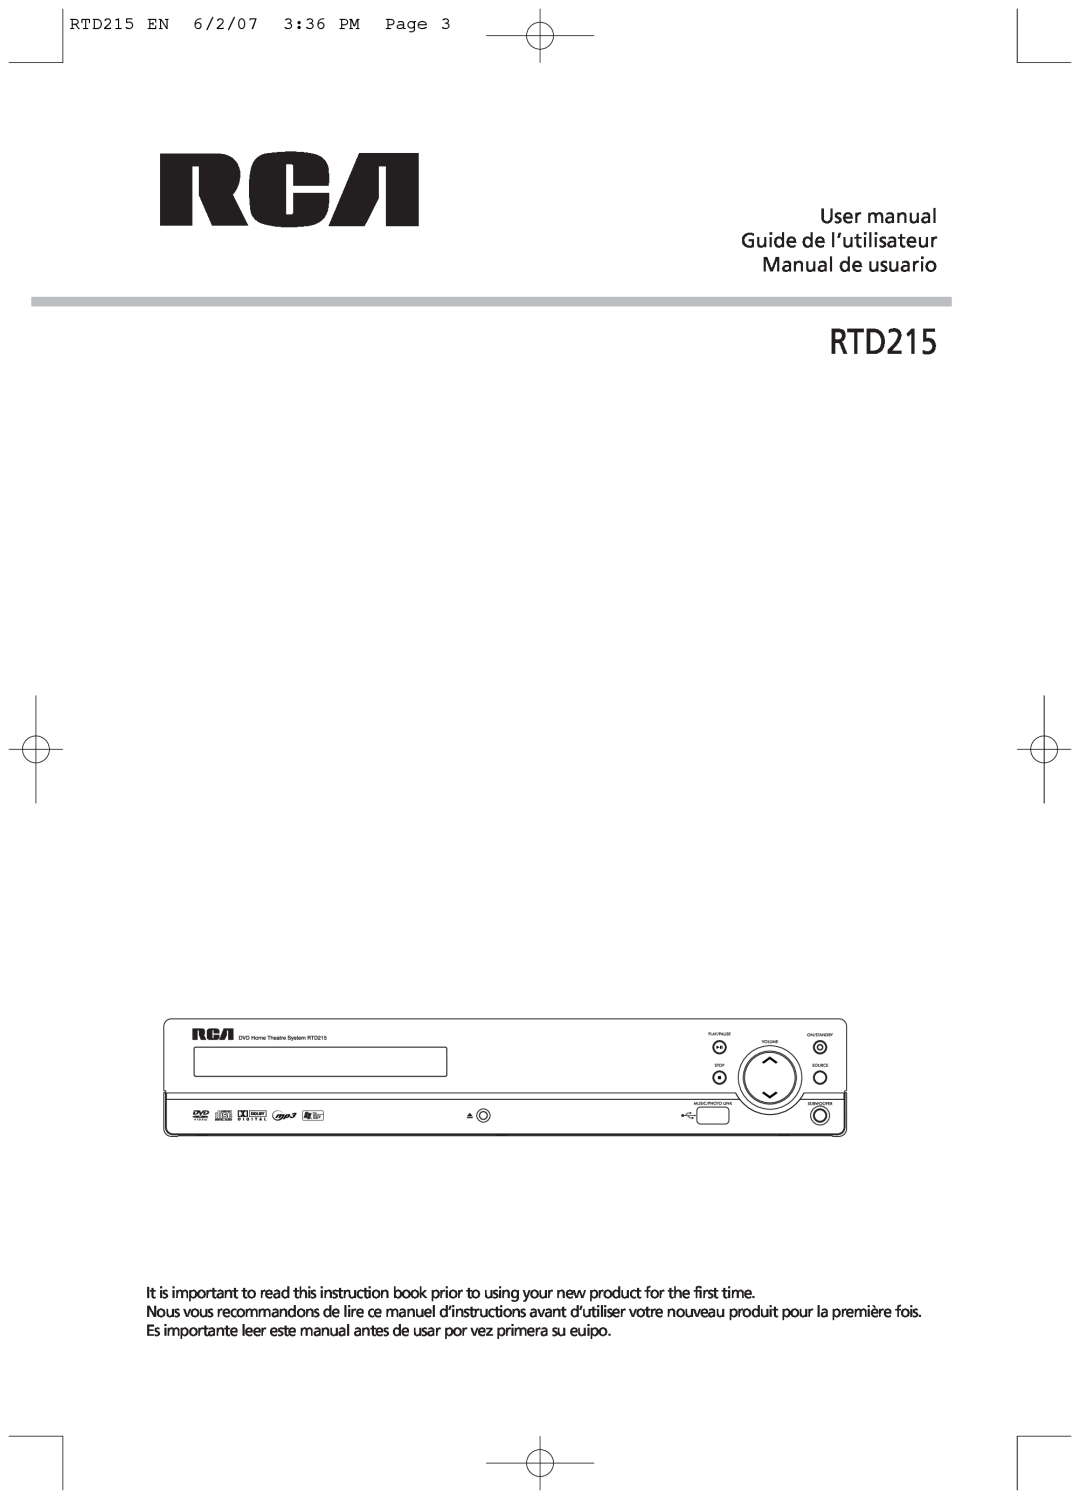 RCA user manual RTD215 EN 6/2/07 3 36 PM Page 